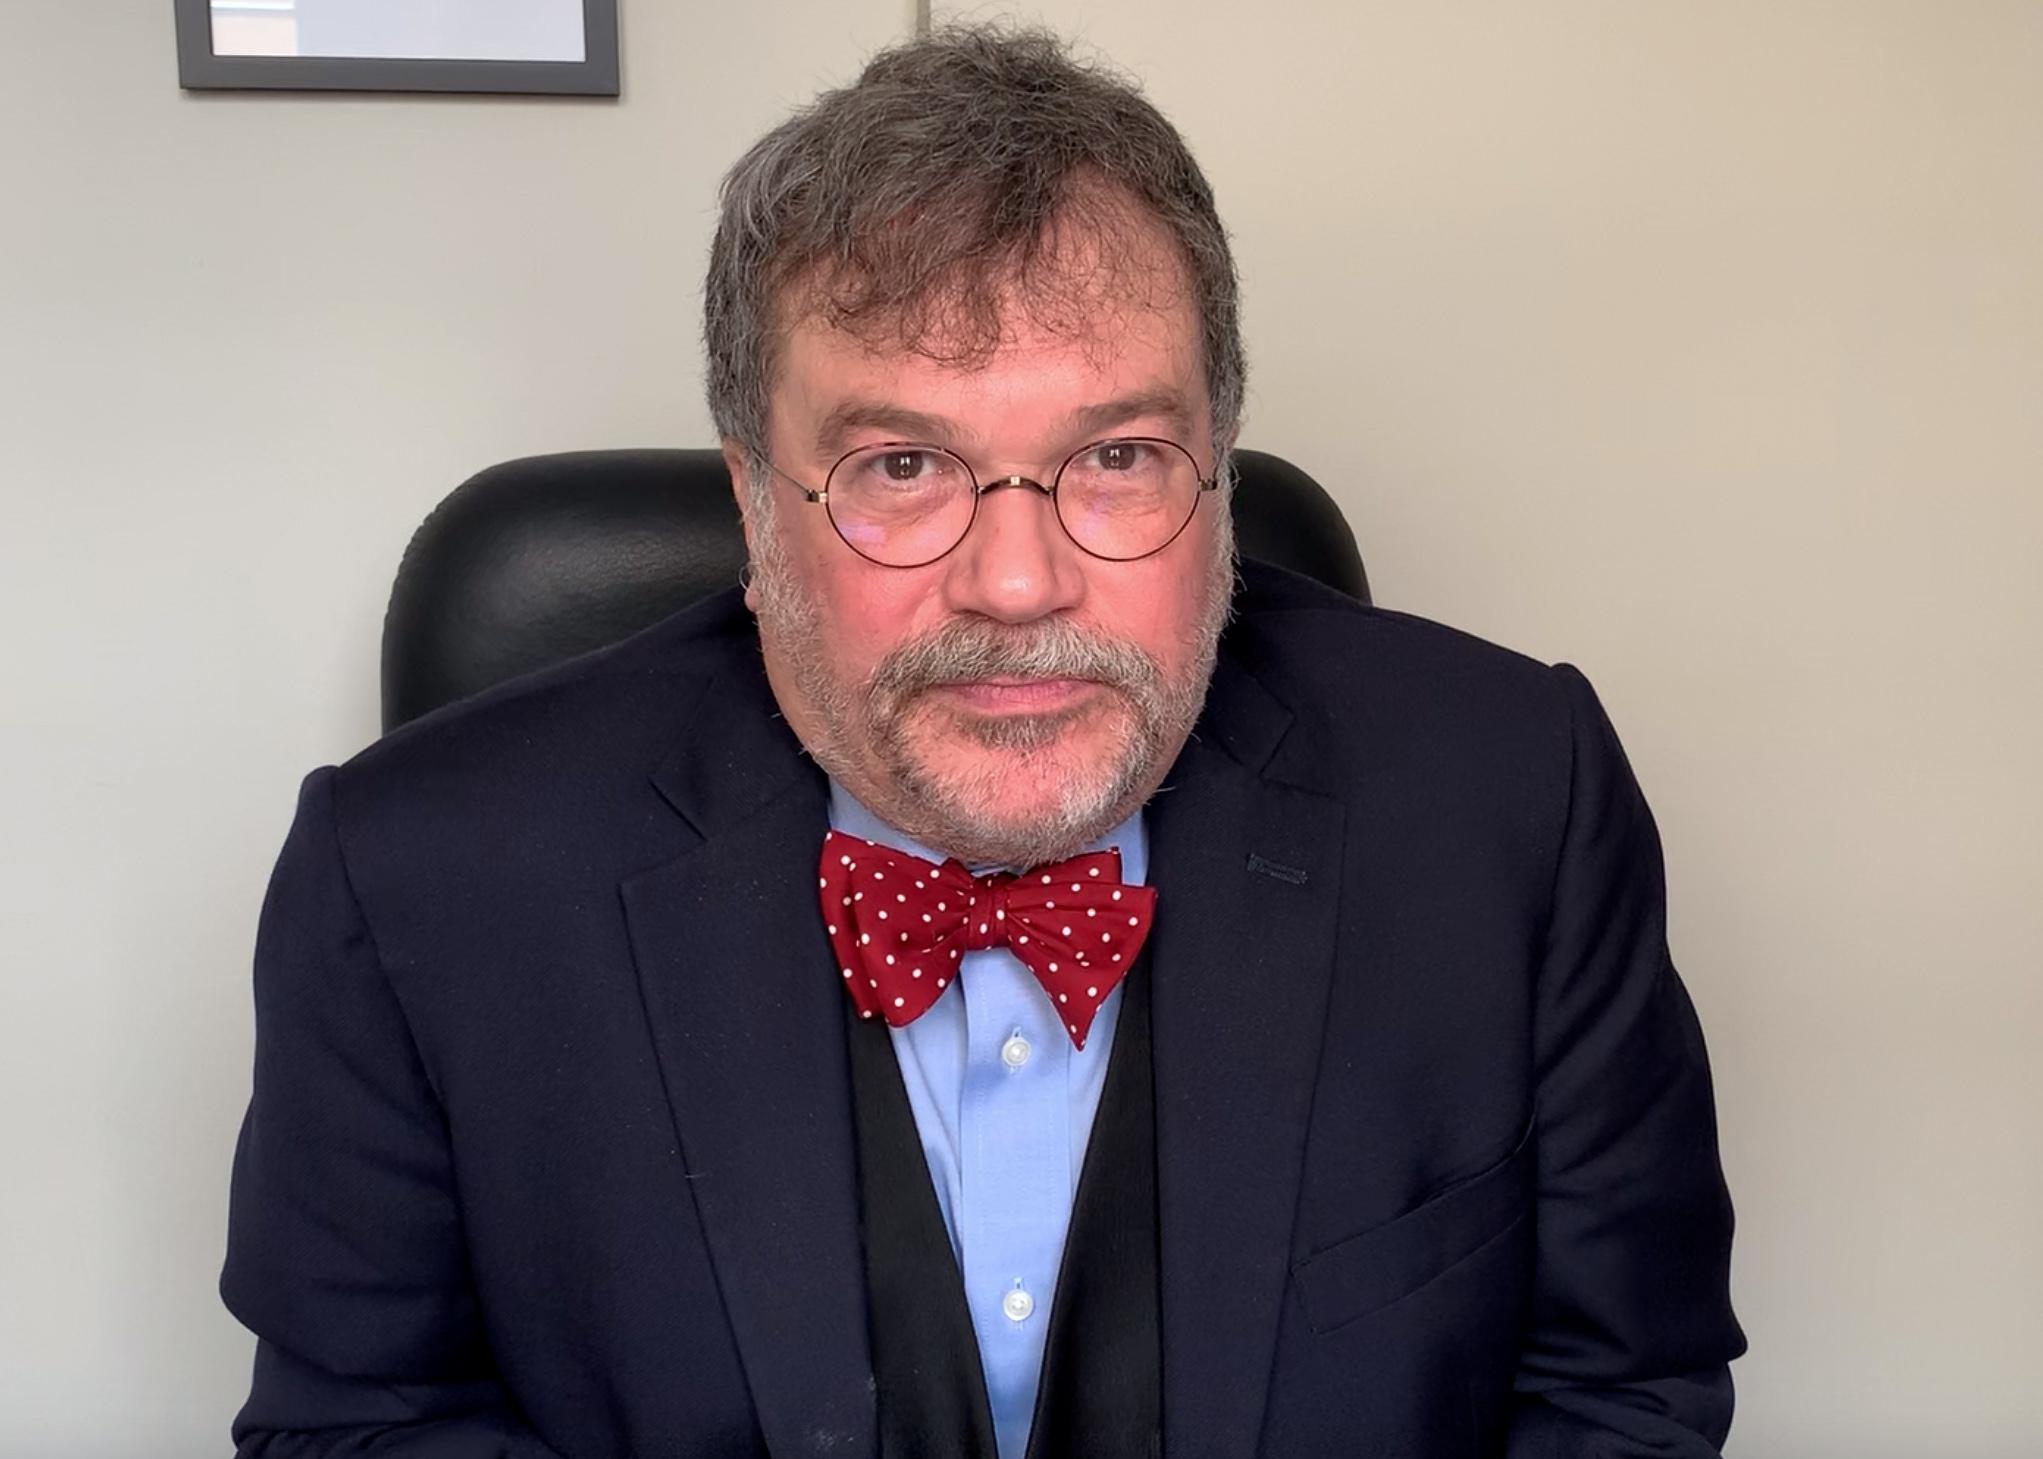 Vaccine expert Peter Hotez reveals 3 things to help Houston reopen ...